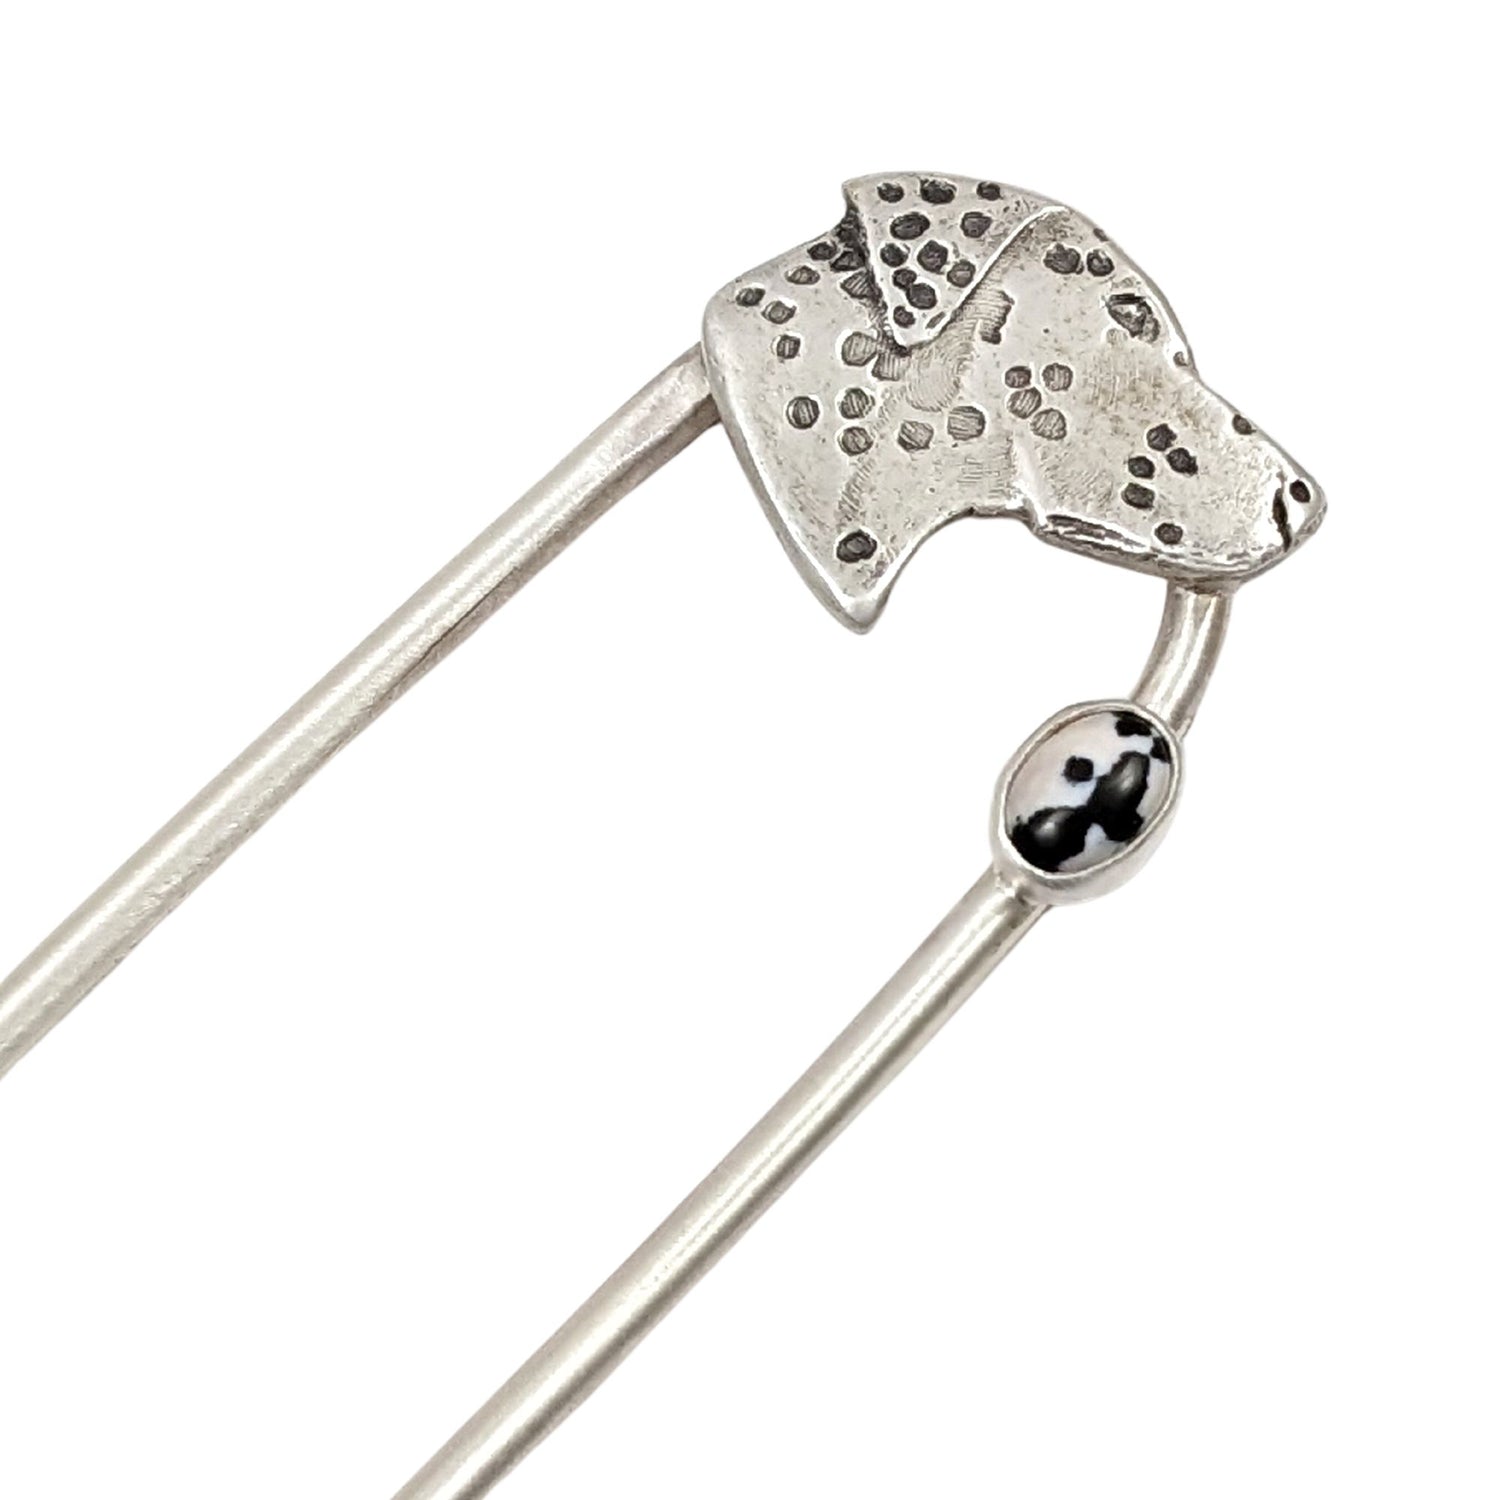 Sterling silver hair fork. Design is a profile of a dalmatian dog head and neck. There is a small oval black and white stone near the top of the right fork. The dalmatian spots are darkened.